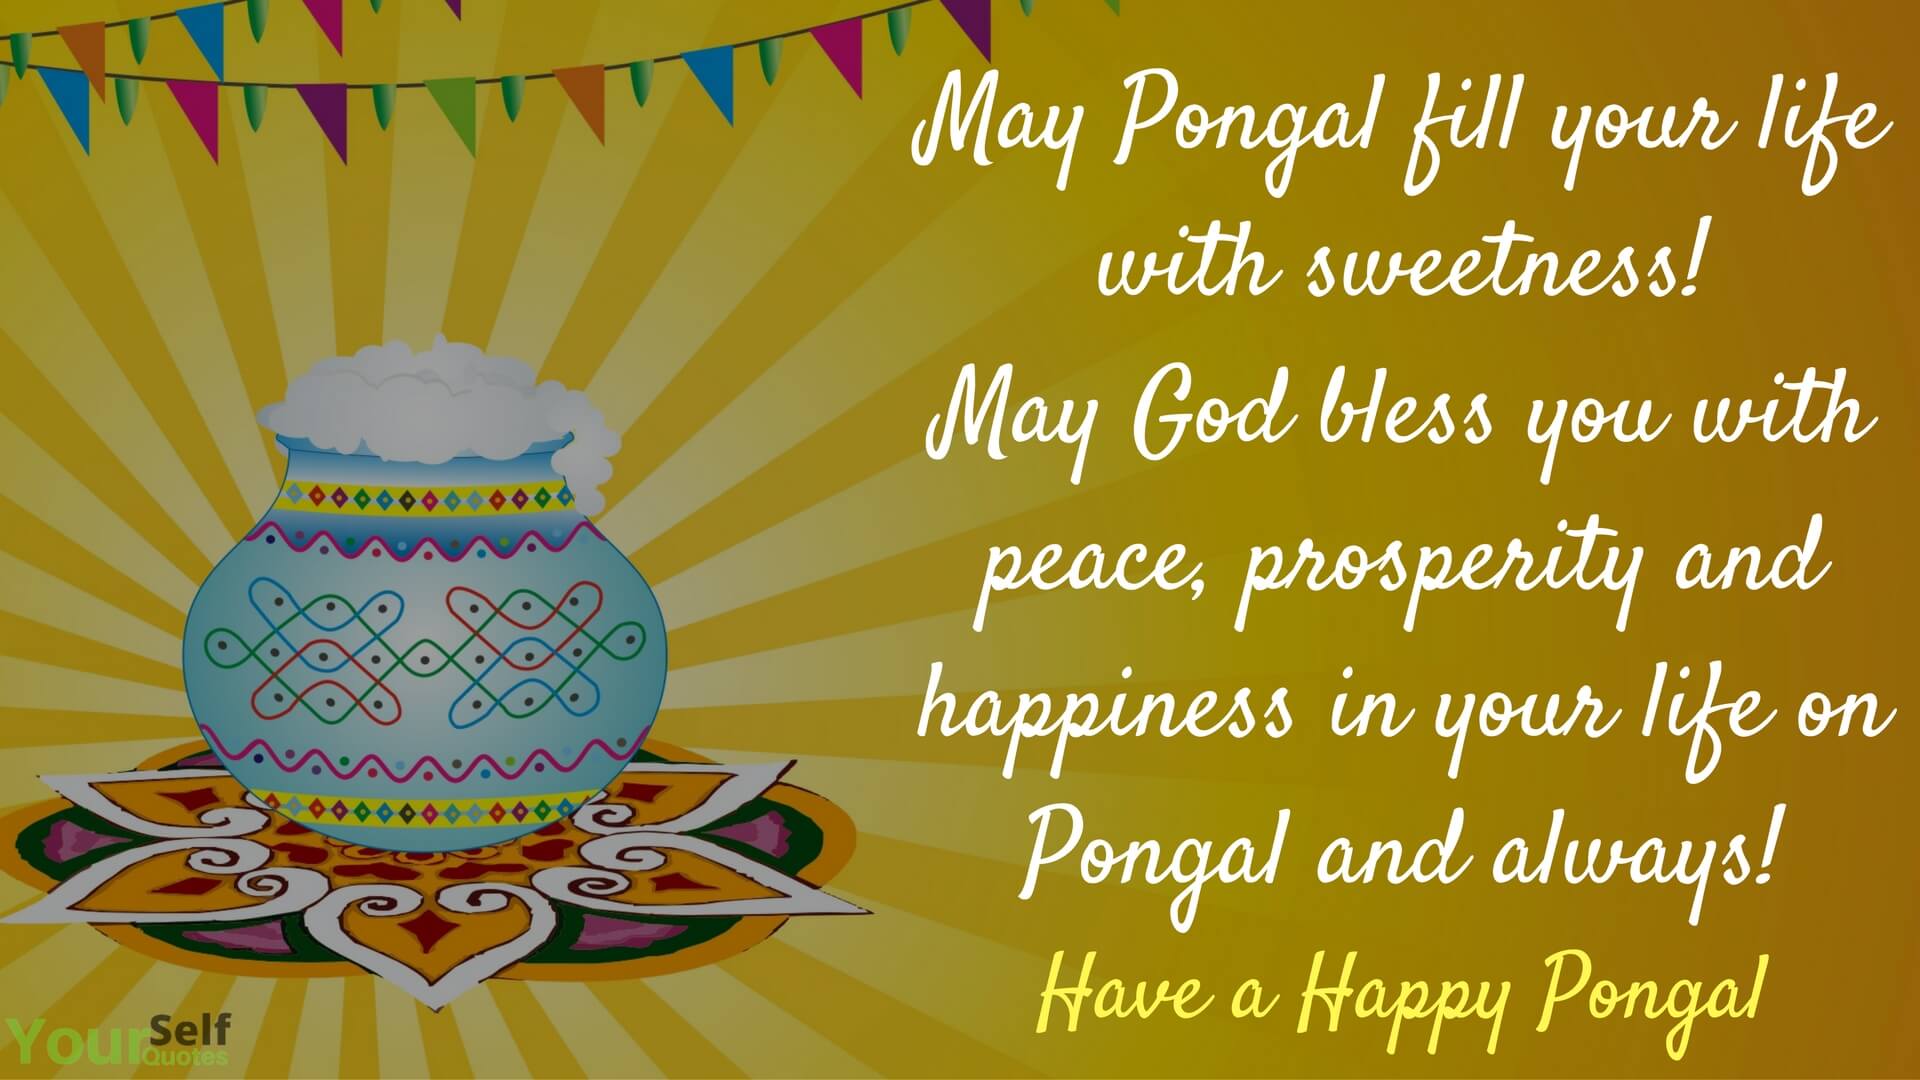 Pongal Day Pictures